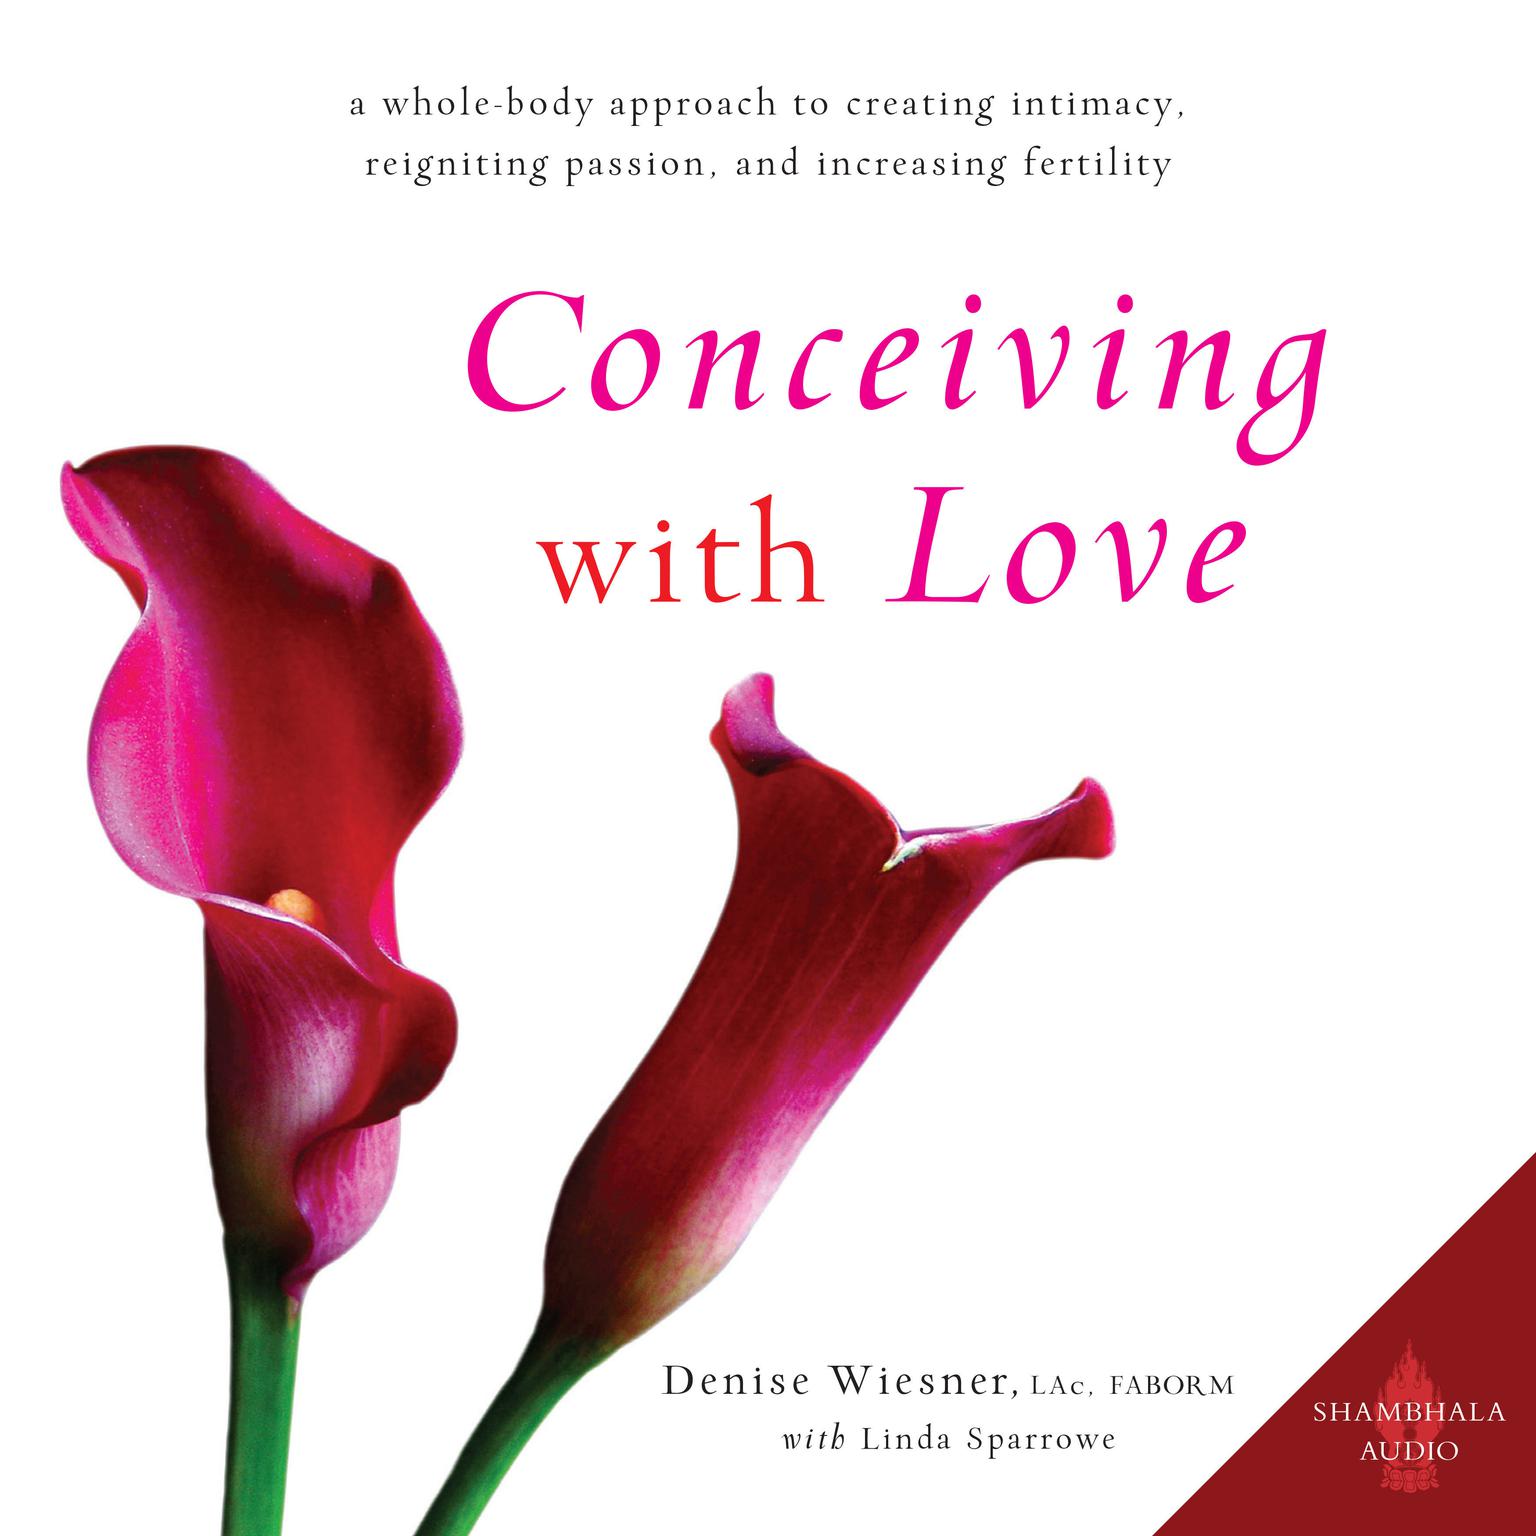 Conceiving with Love: A Whole-Body Approach to Creating Intimacy, Reigniting Passion, and Increasing Fertility Audiobook, by Denise Wiesner